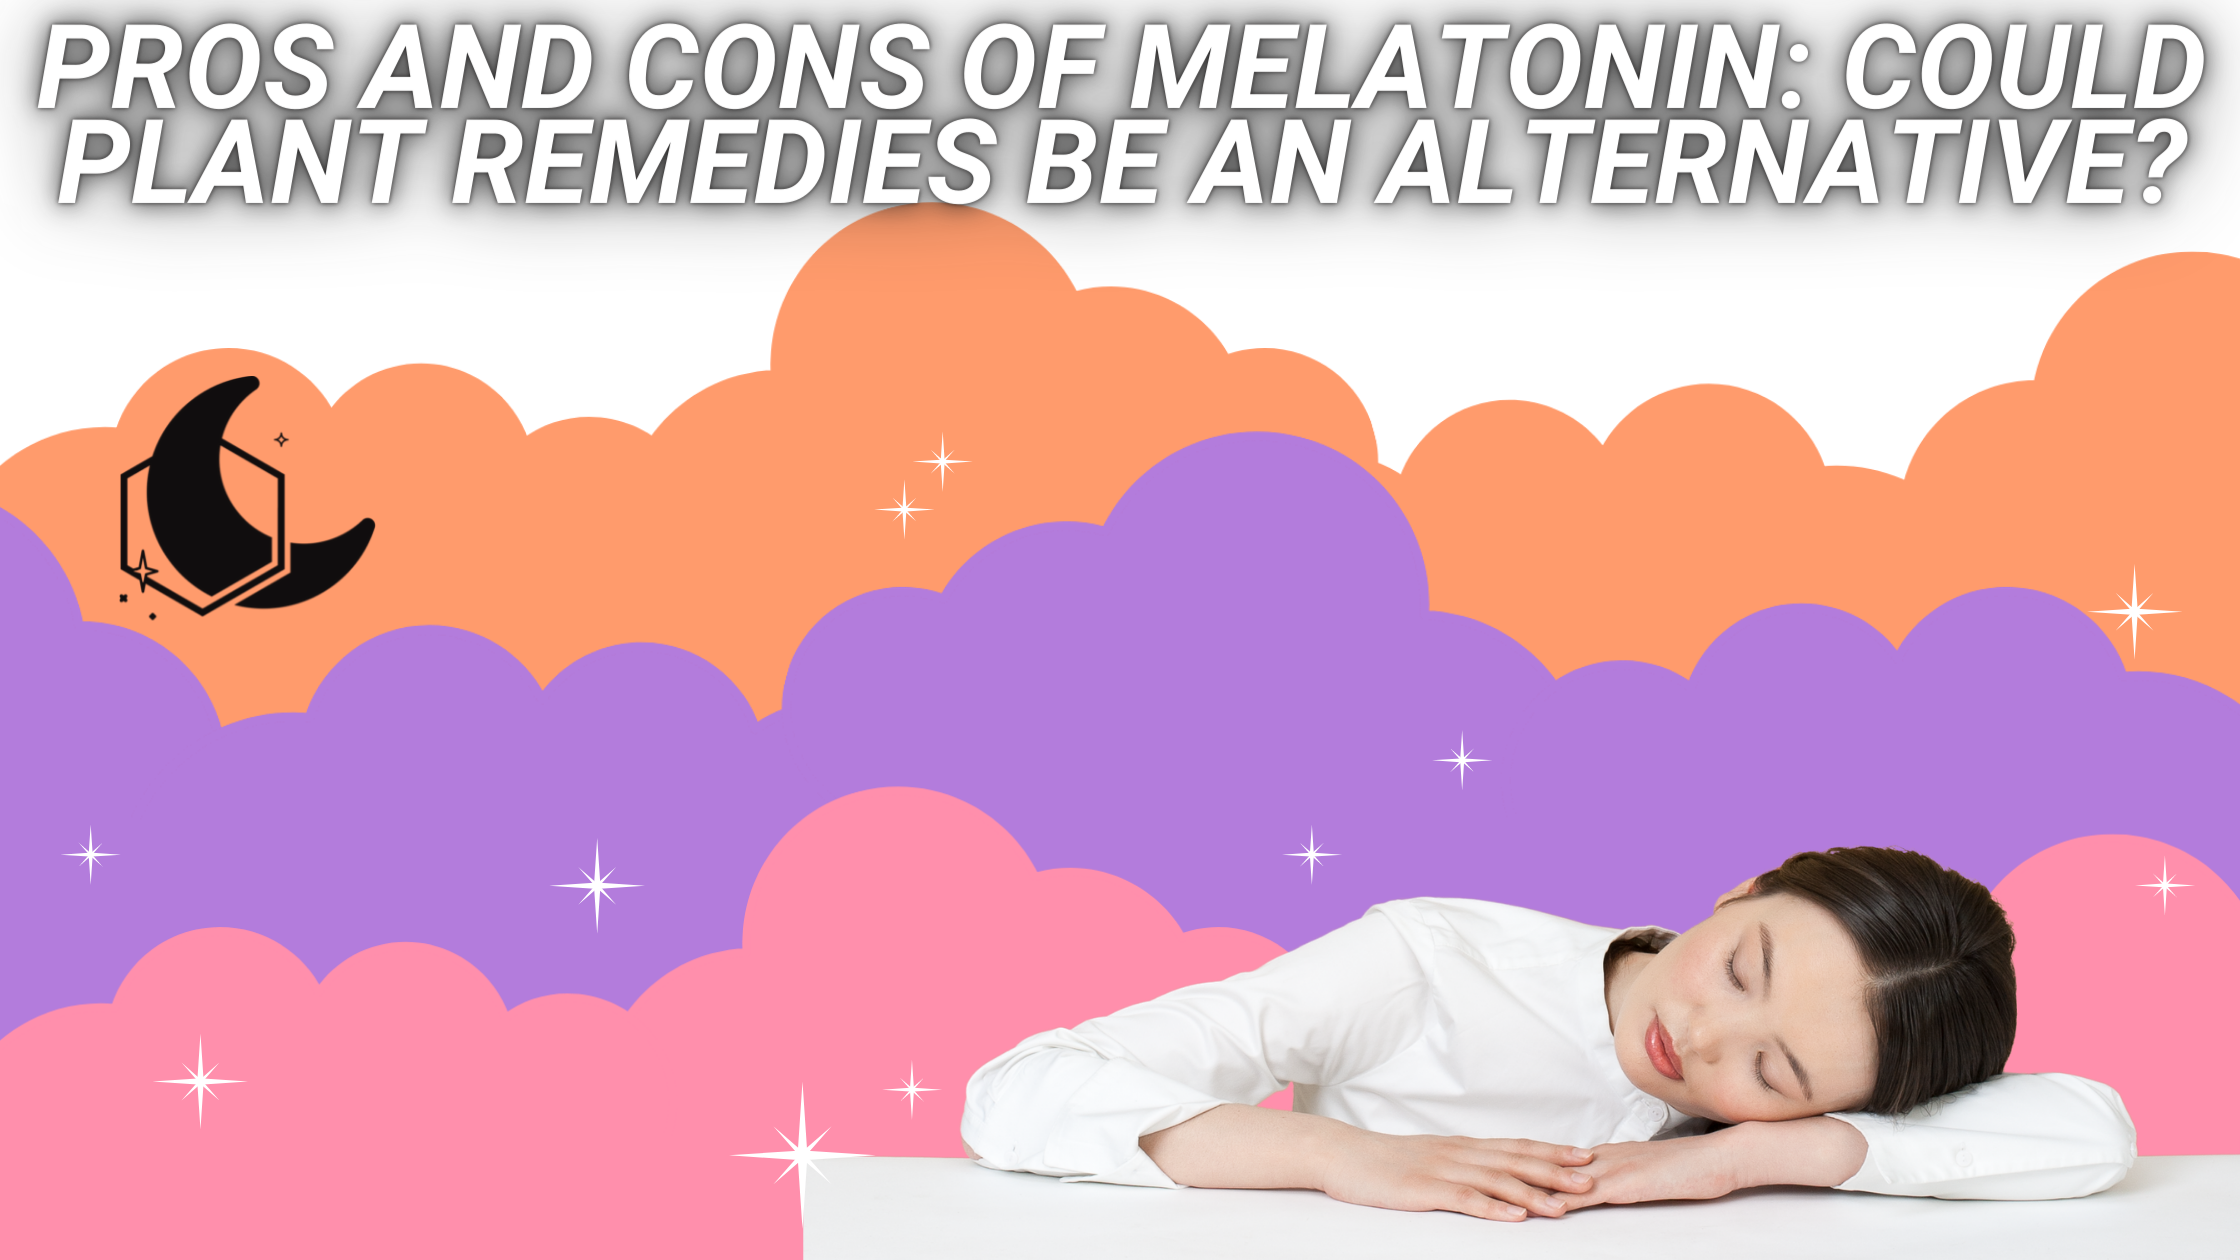 PROS AND CONS OF MELATONIN COULD PLANT REMEDIES BE AN ALTERNATIVE 2